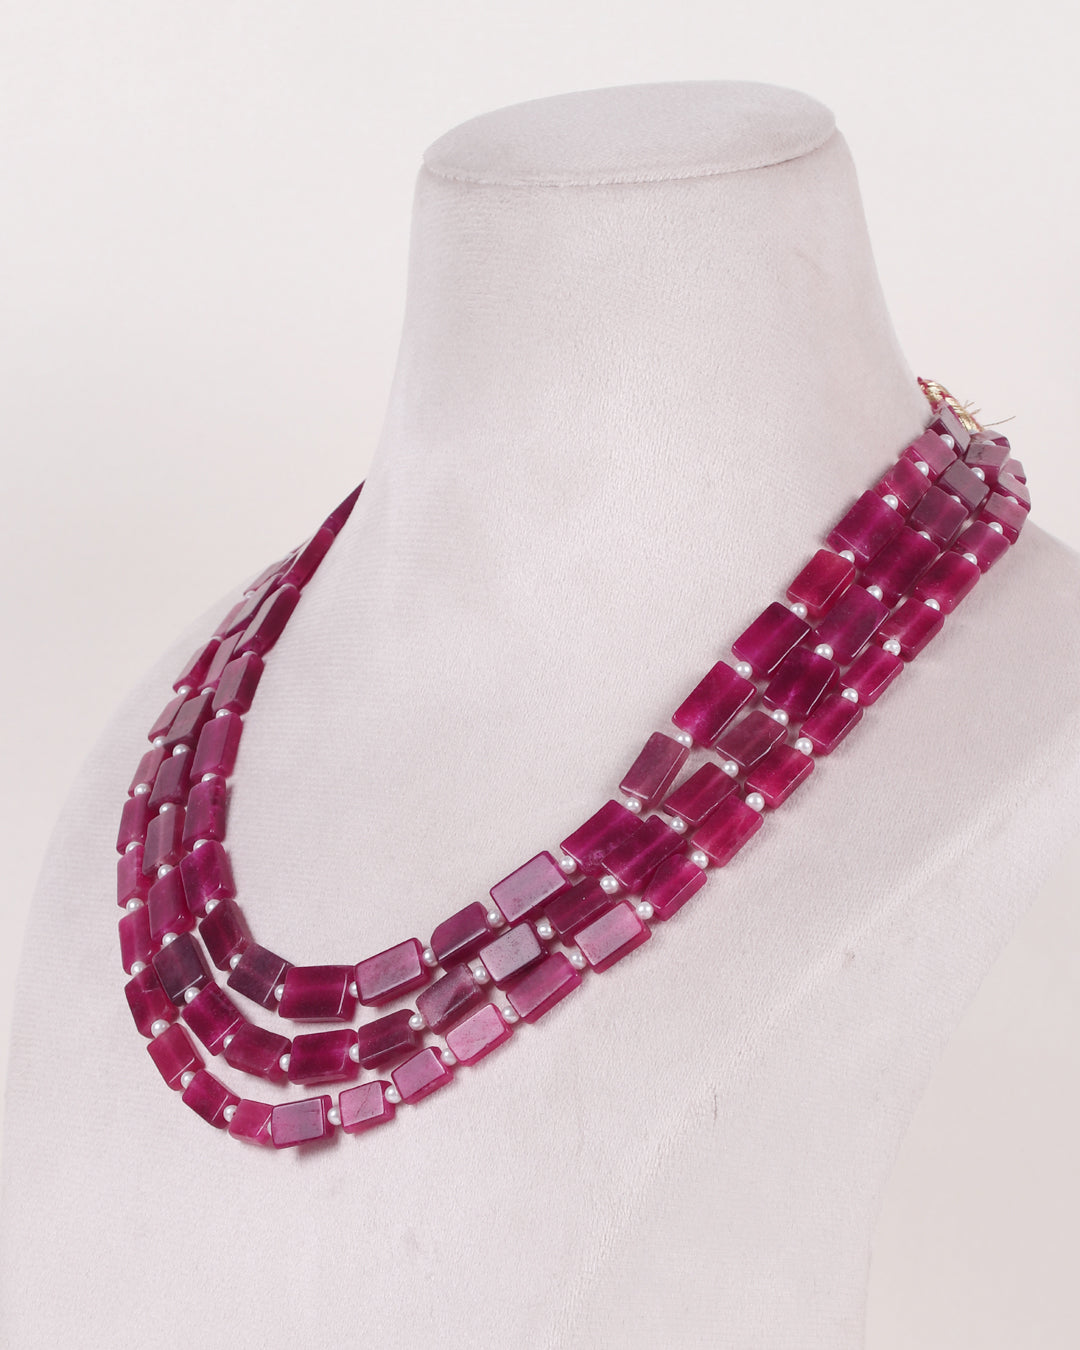 Red Quartz And Pearl Gemstone Beads Necklace Jewelry